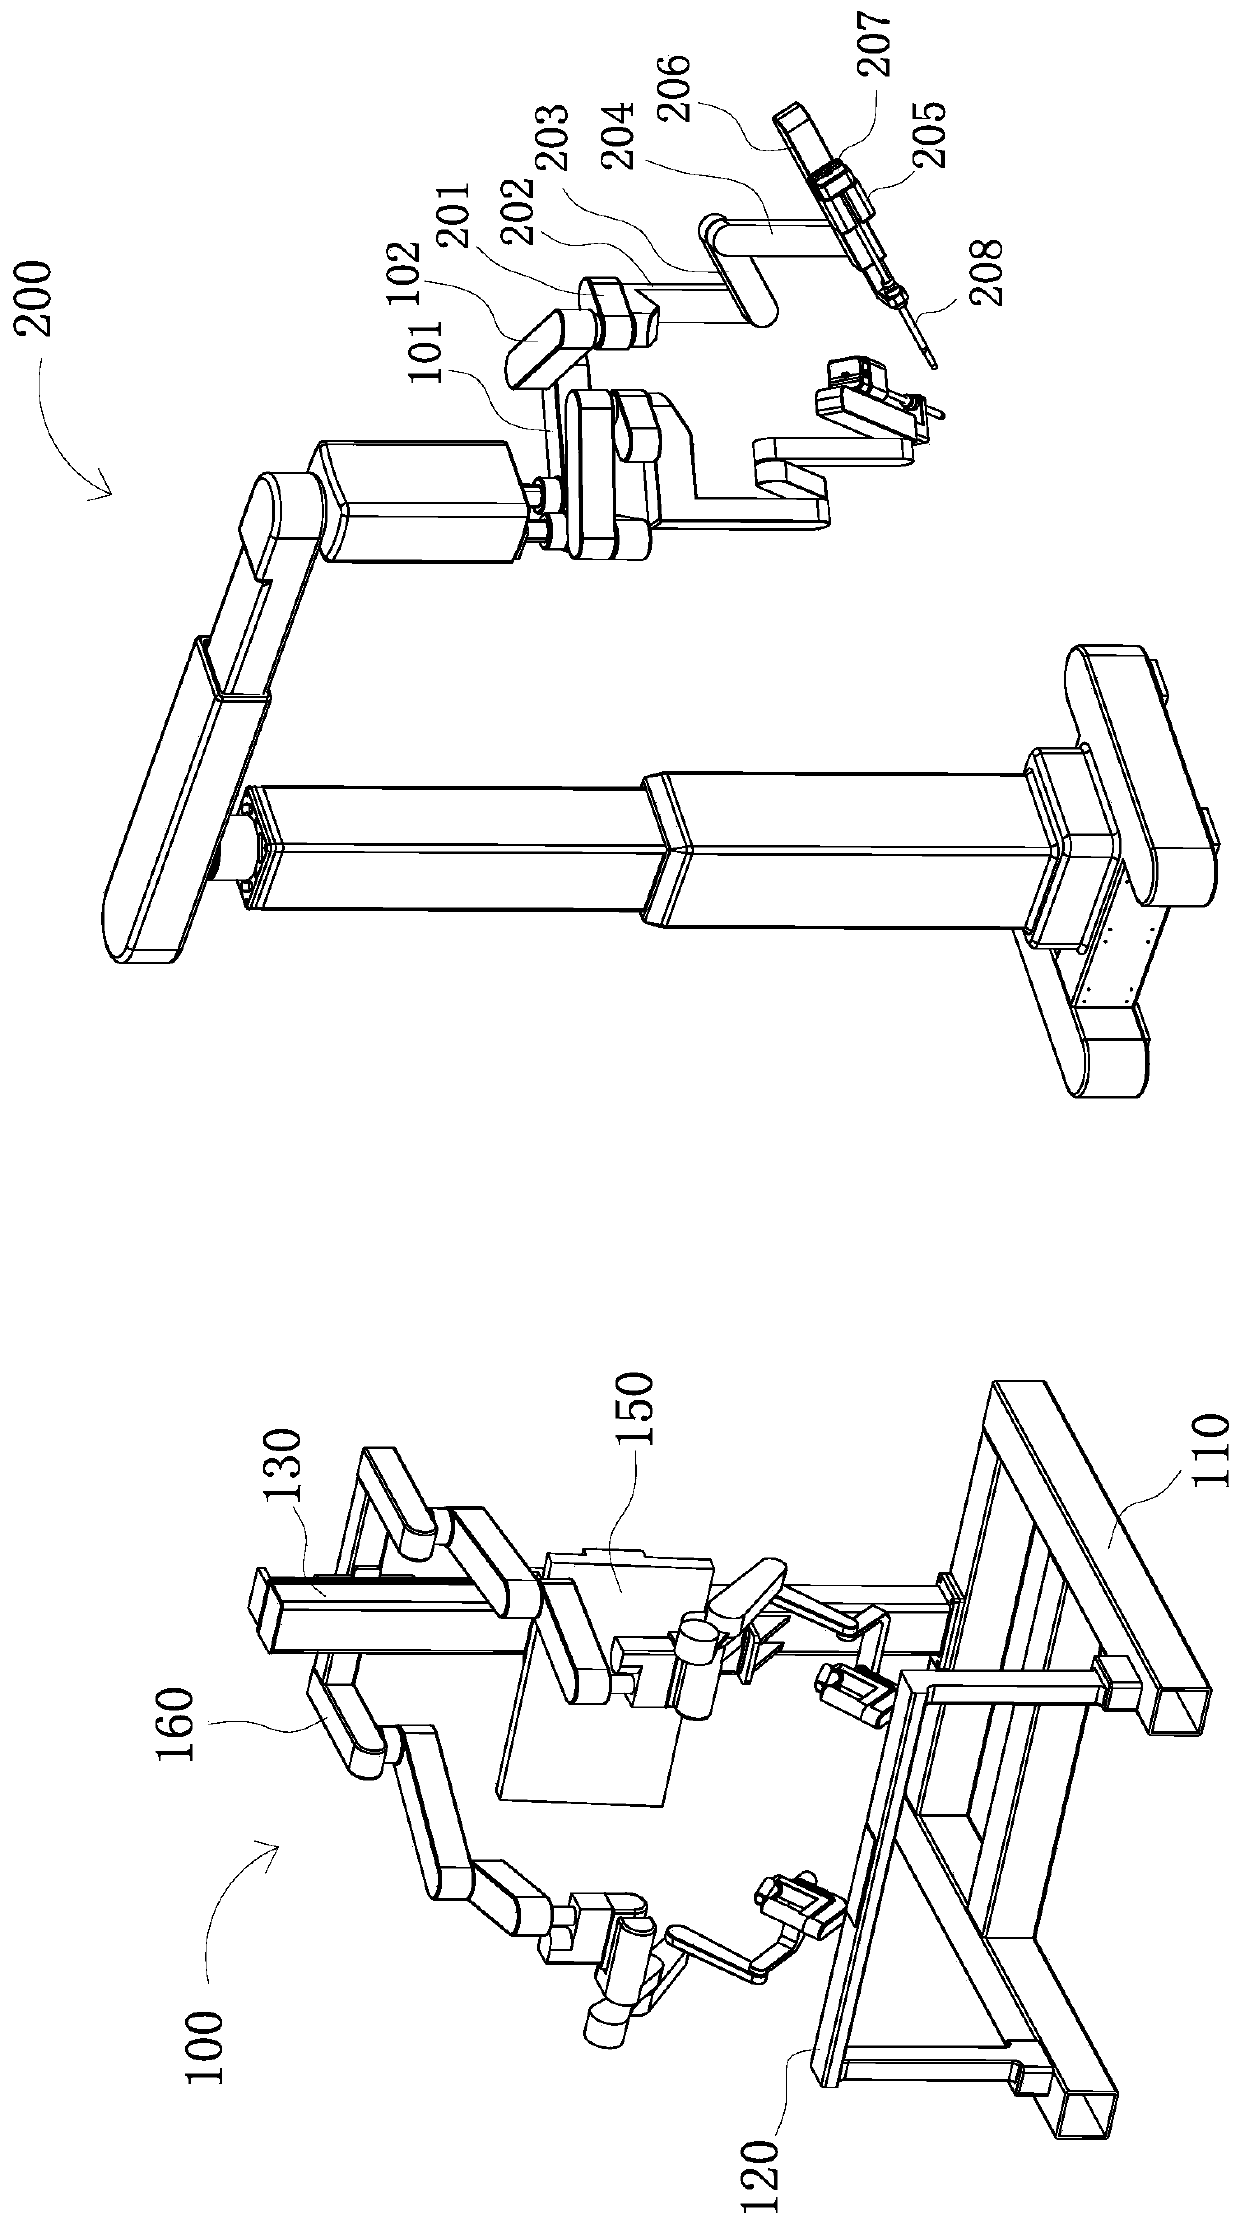 Split minimally invasive surgical instrument auxiliary system